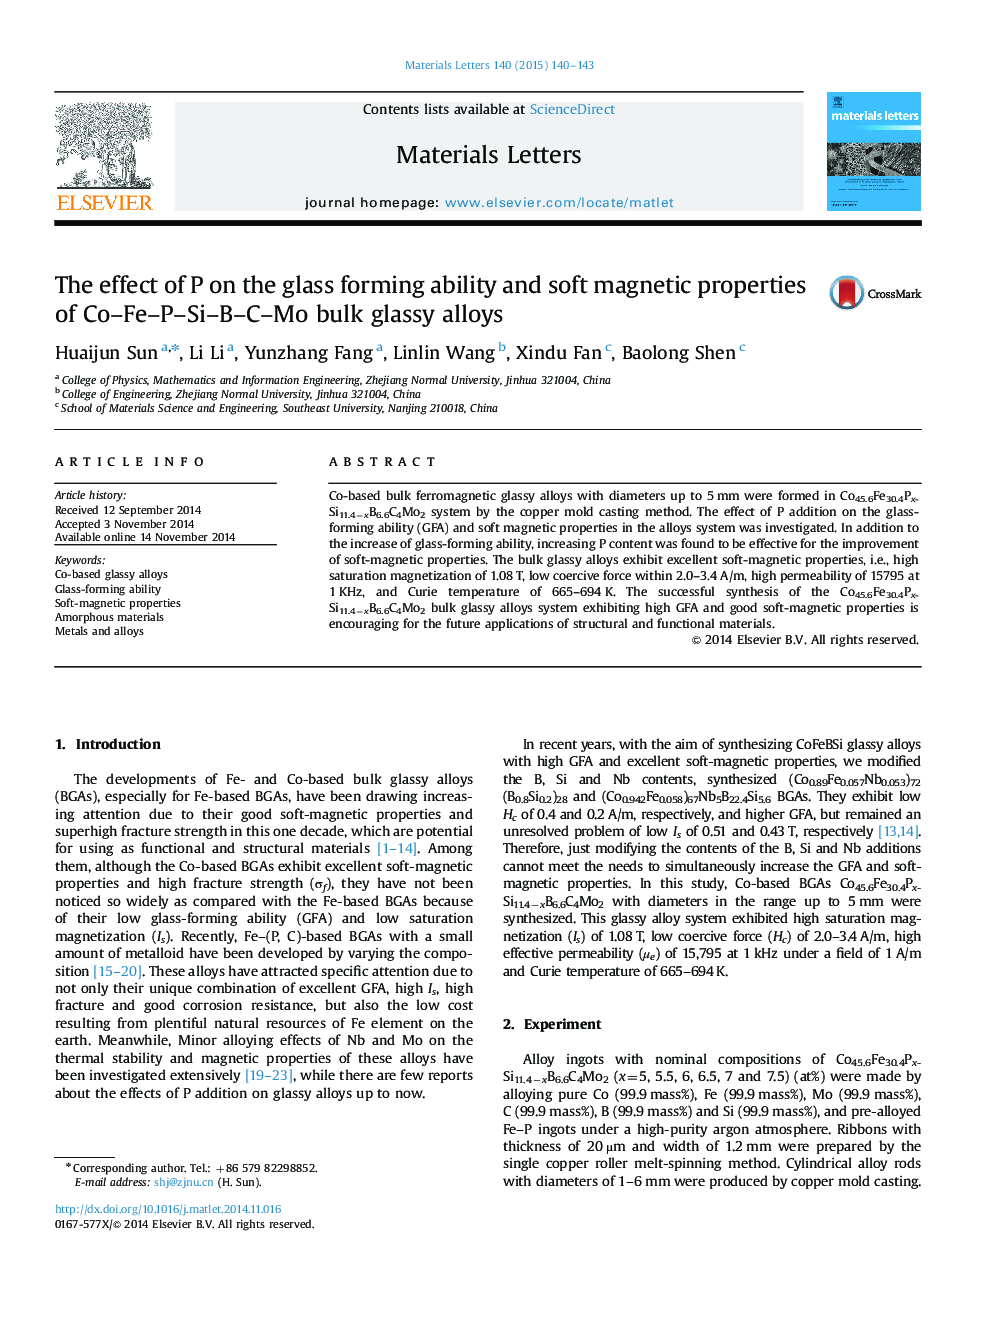 The effect of P on the glass forming ability and soft magnetic properties of Co–Fe–P–Si–B–C–Mo bulk glassy alloys